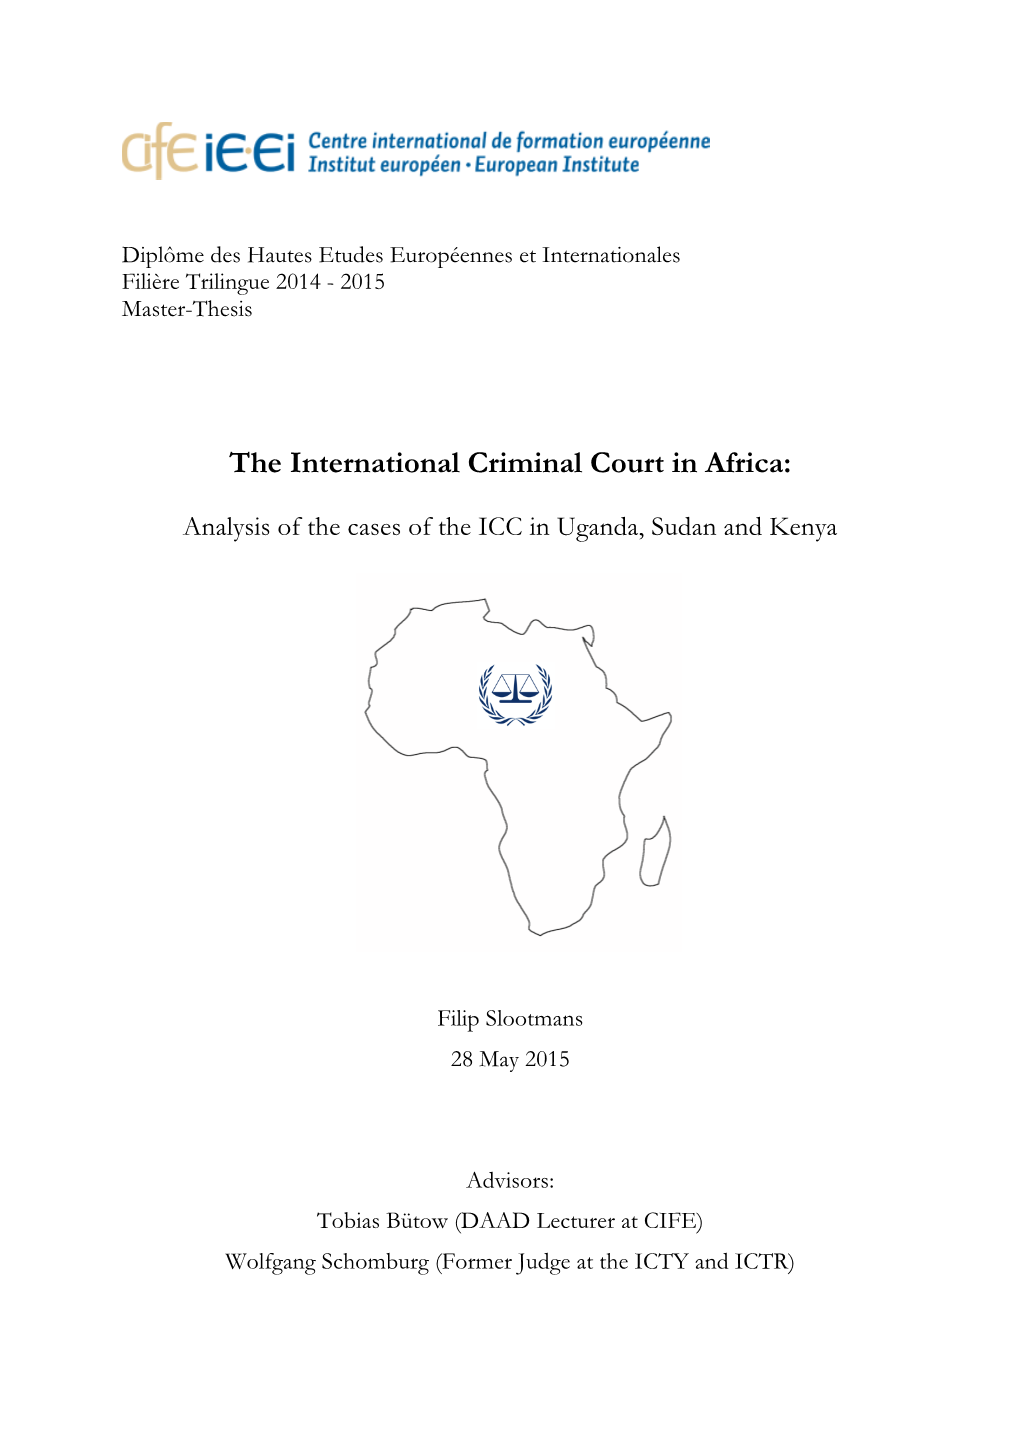 The International Criminal Court in Africa